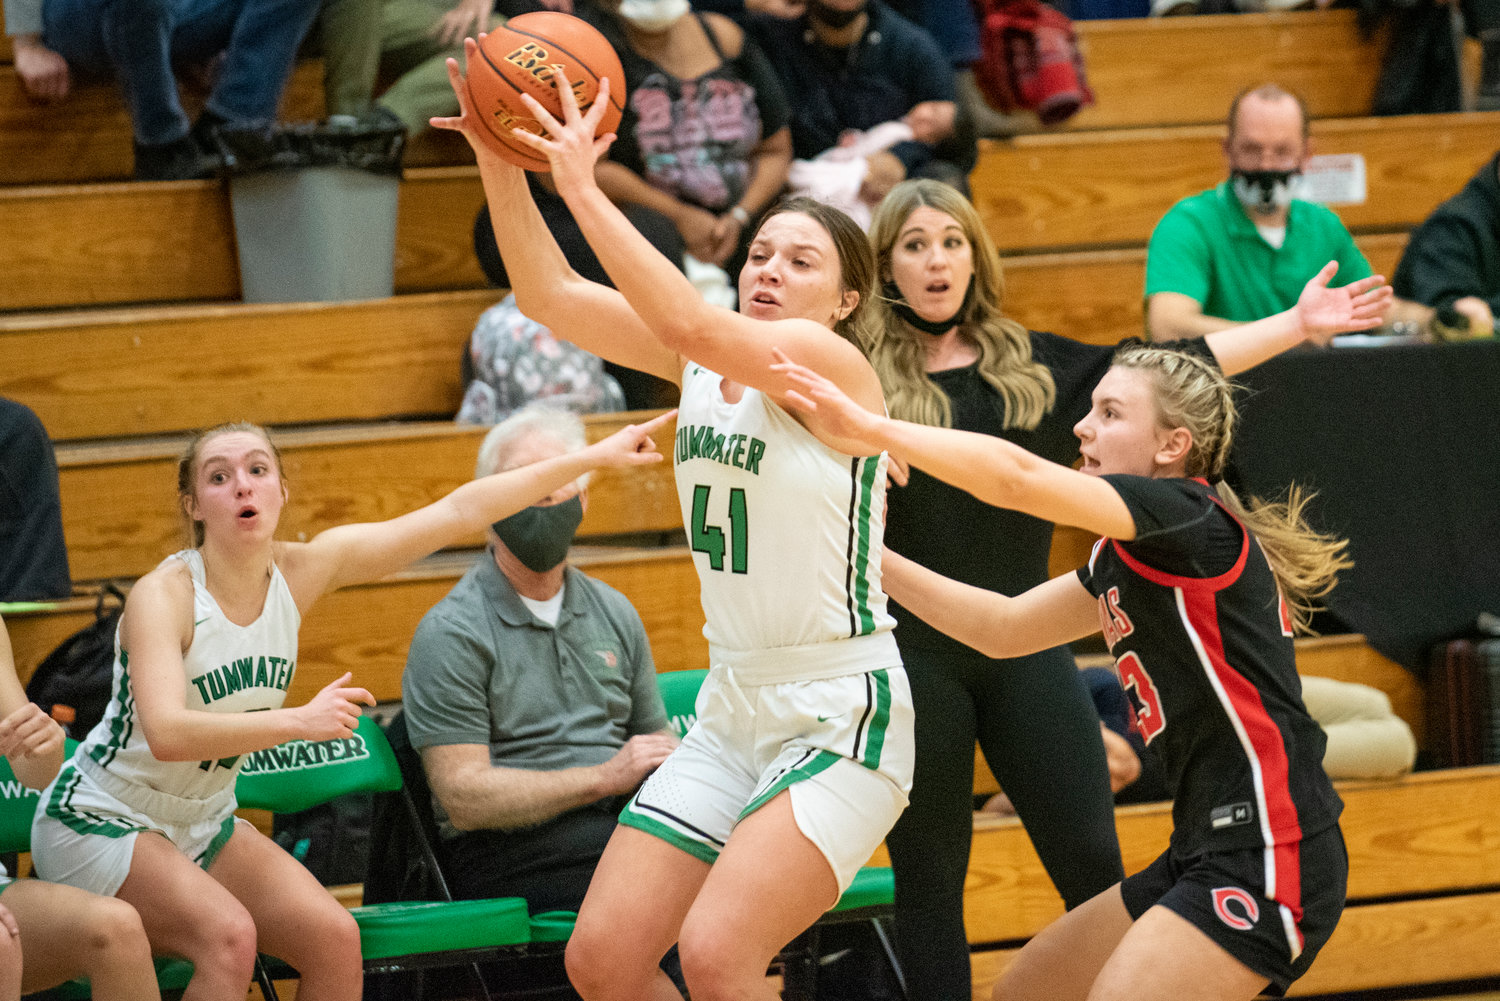 Tumwater's Cassie Kaufman (41) hauls in an inbound pass against during a non-league home game against Camas on Jan. 10.